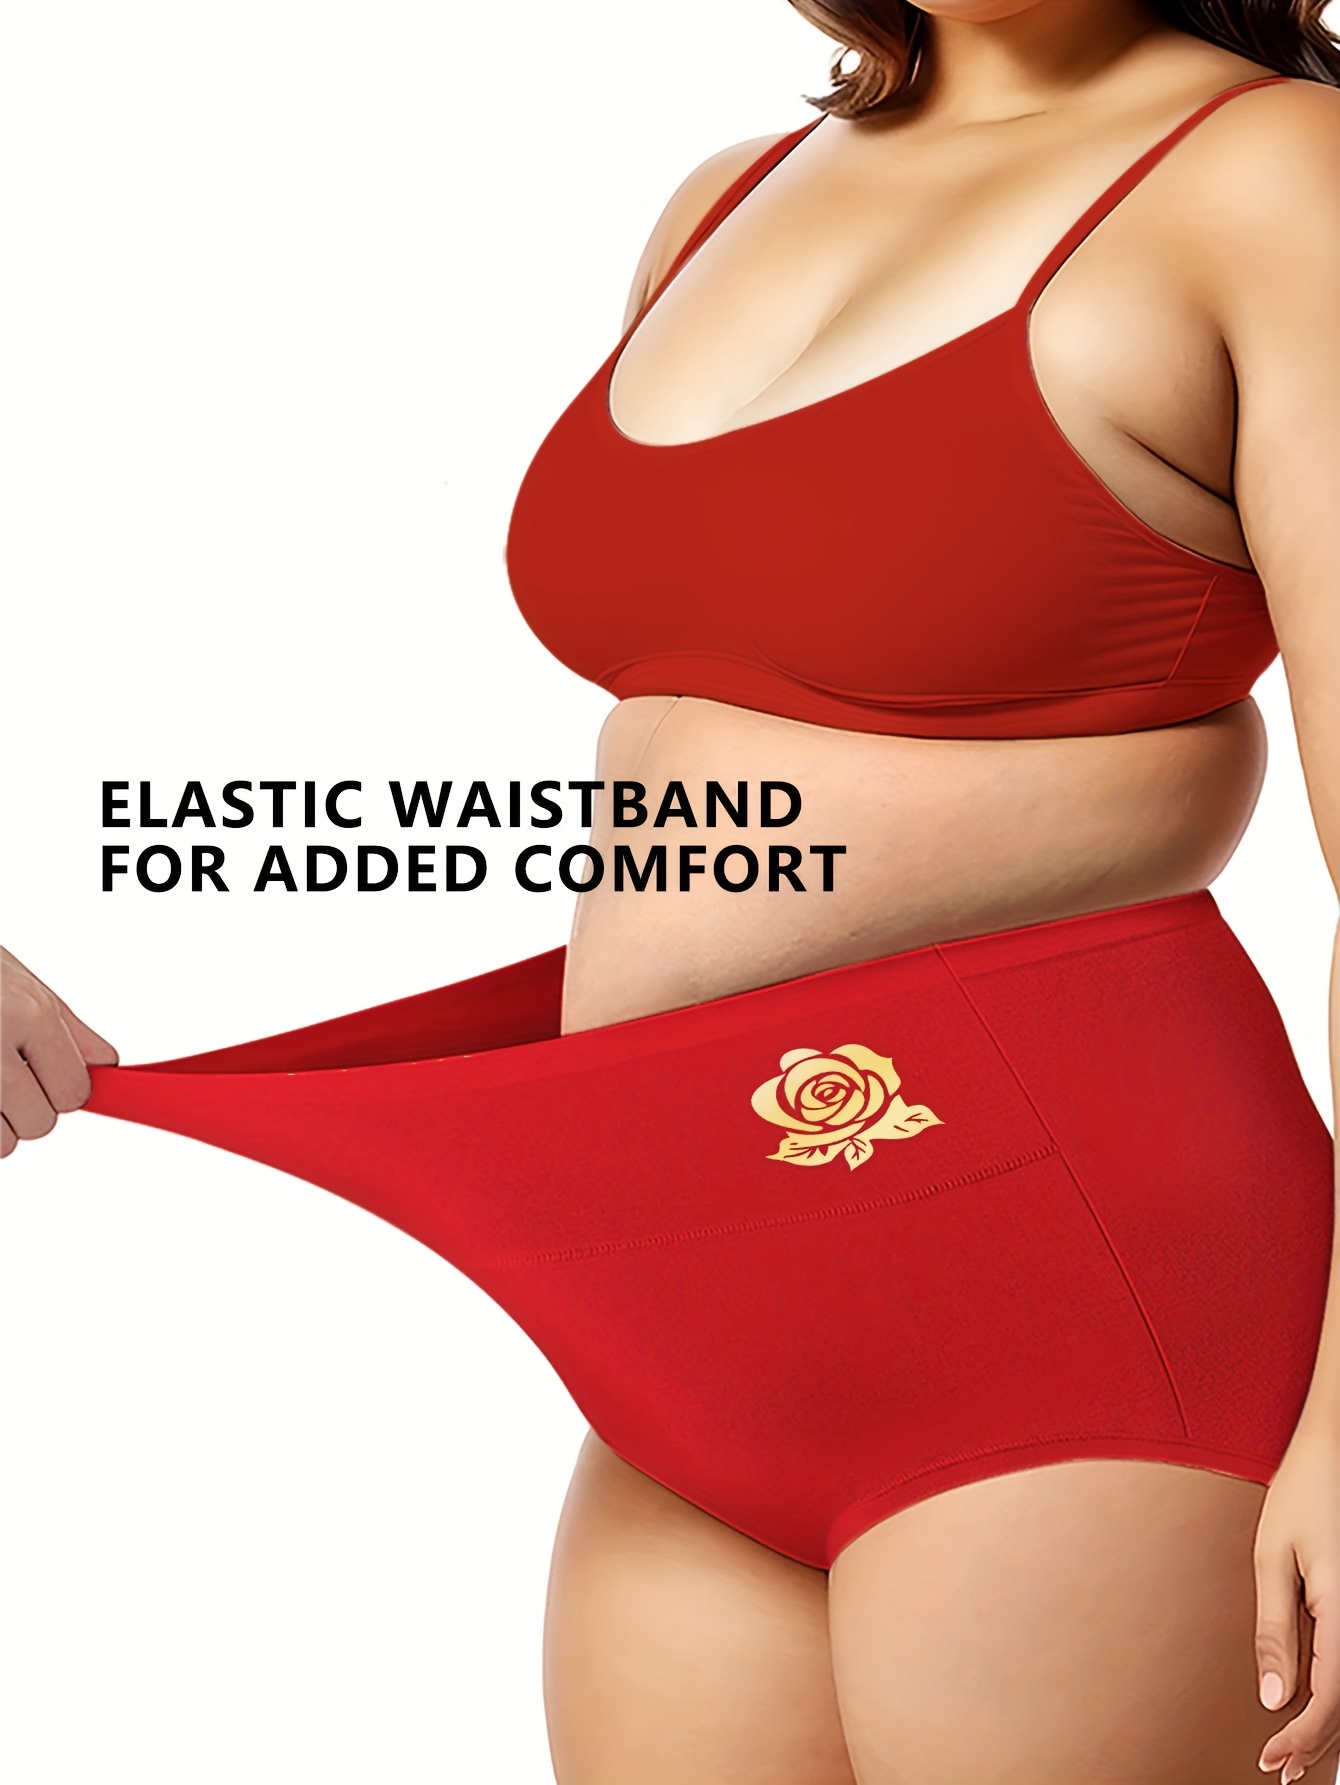 Buy Red Rose - High Waist Panty For Women - Tummy Shaper Panties